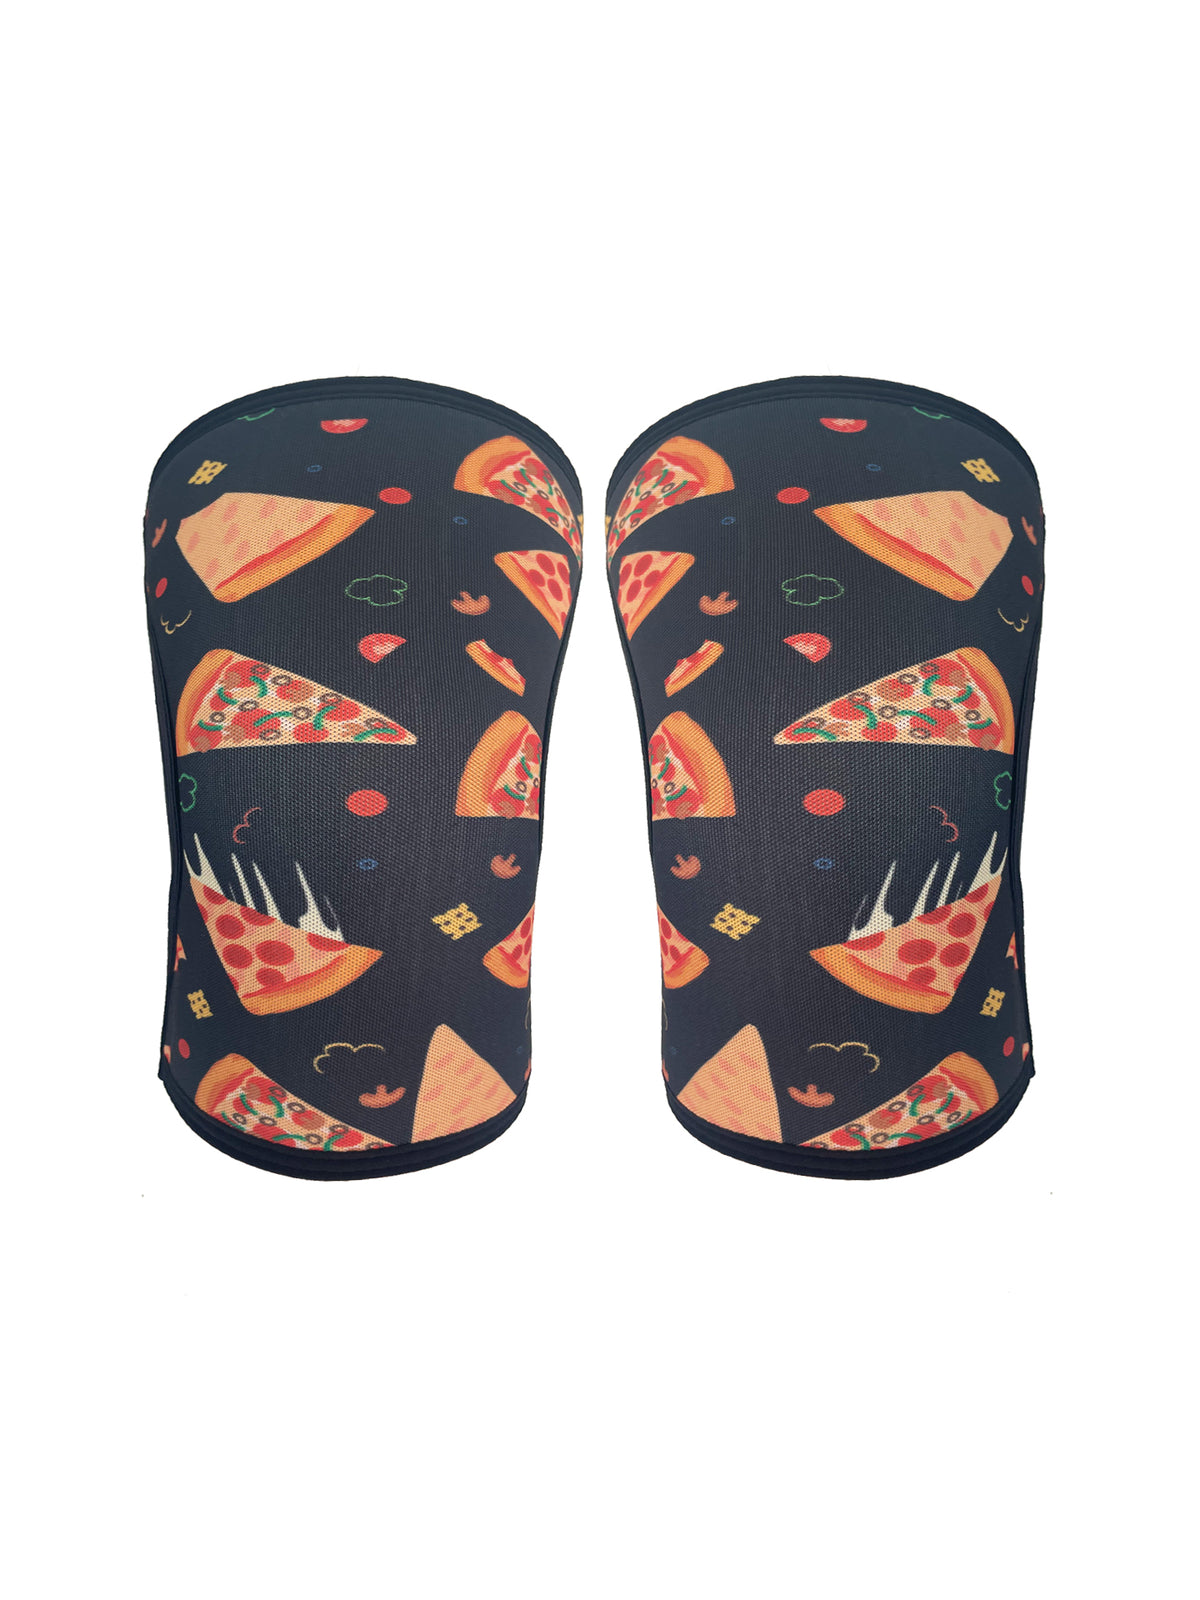 Pizza Your Heart Contour Knee Sleeves